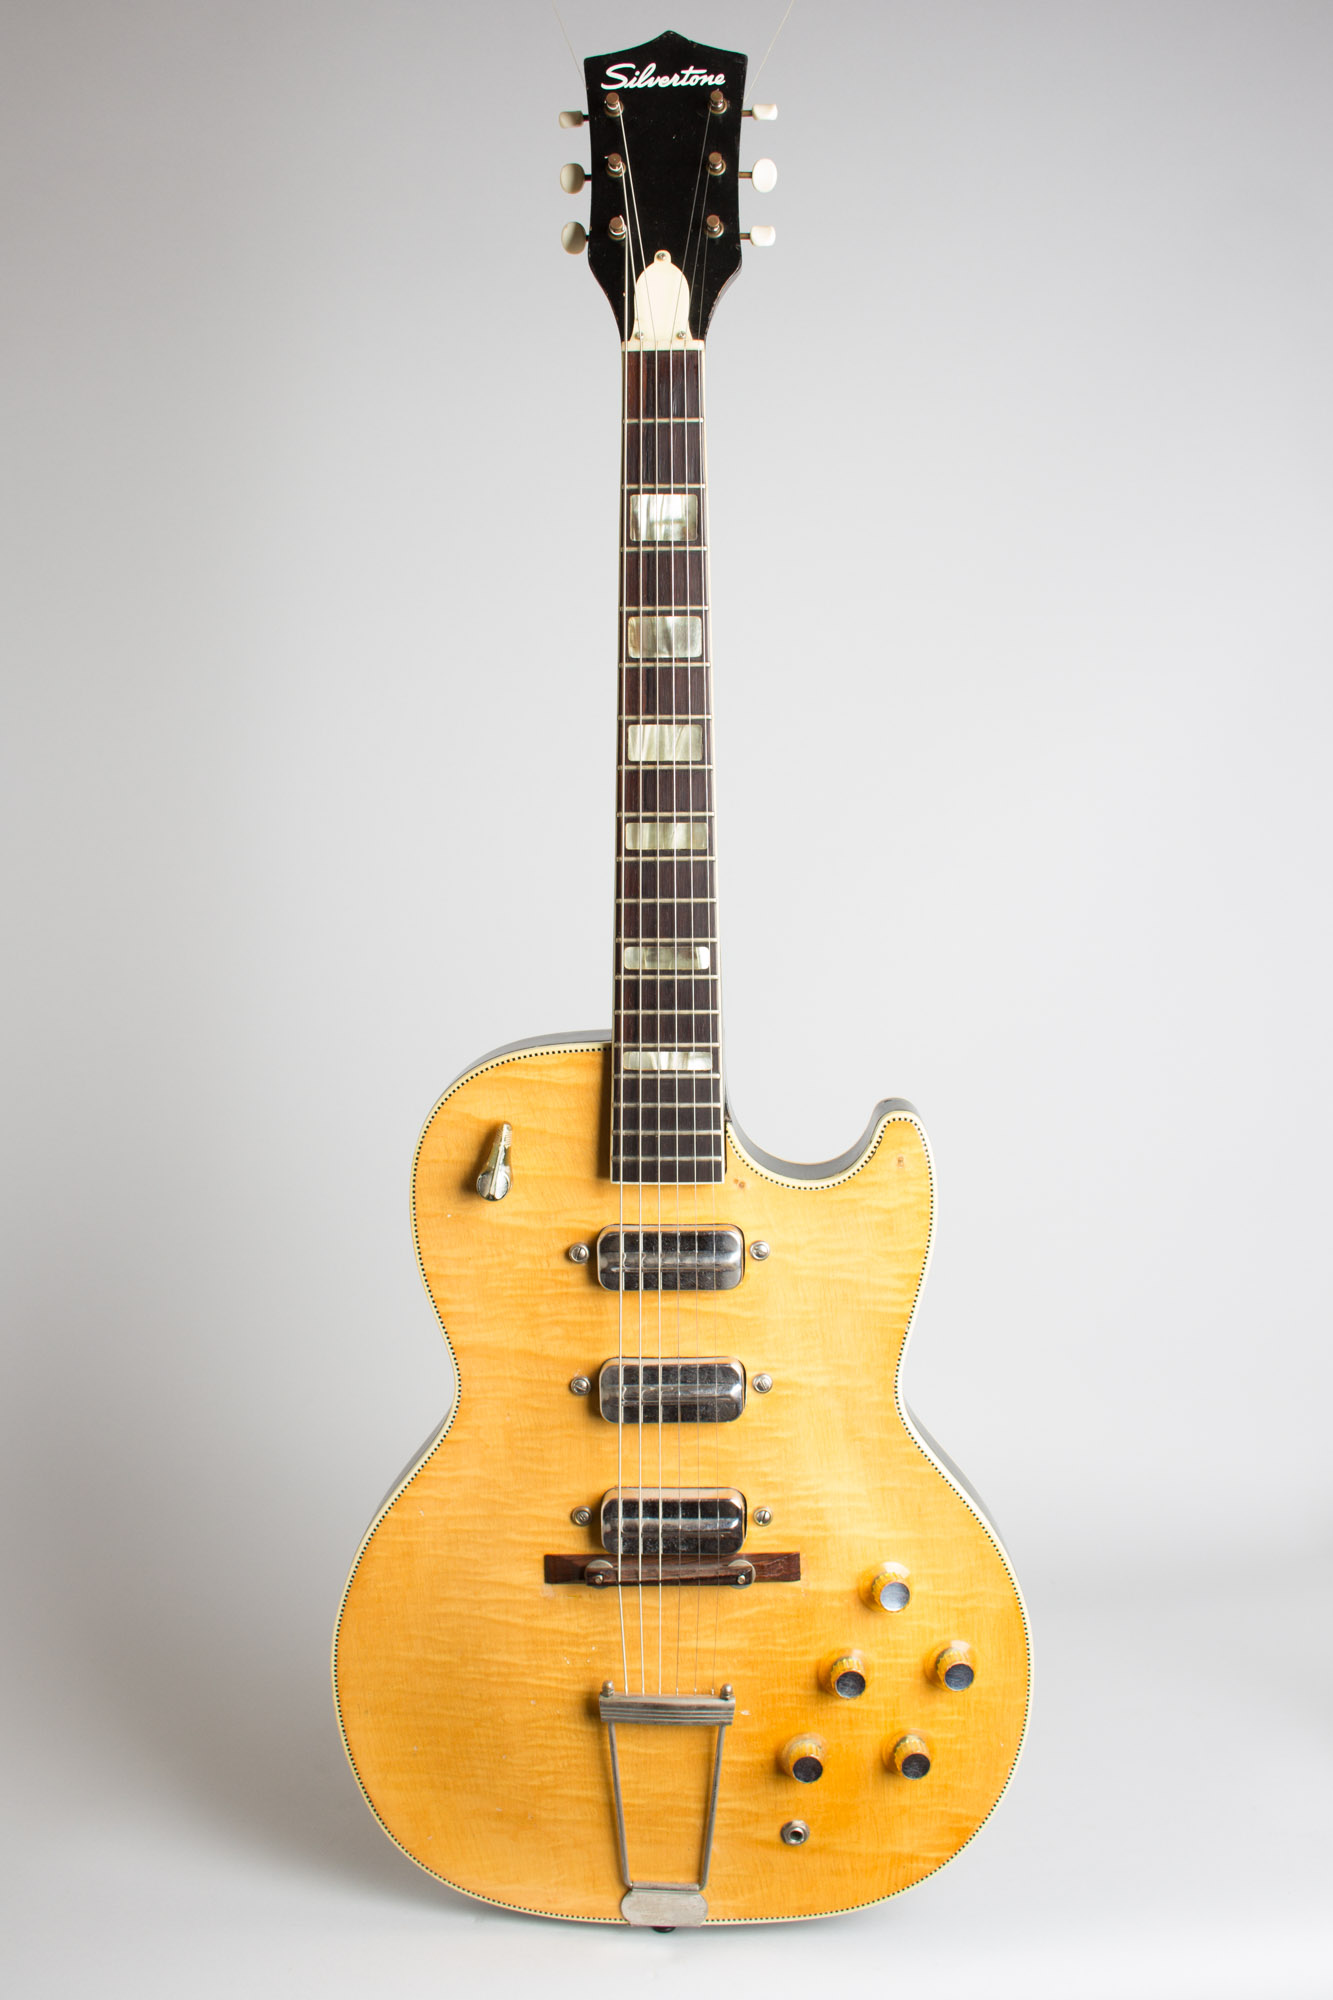 Bore spurv Oh Silvertone Model 1445L Thinline Hollow Body Electric Guitar, made by Kay ,  c. 1962 | RetroFret